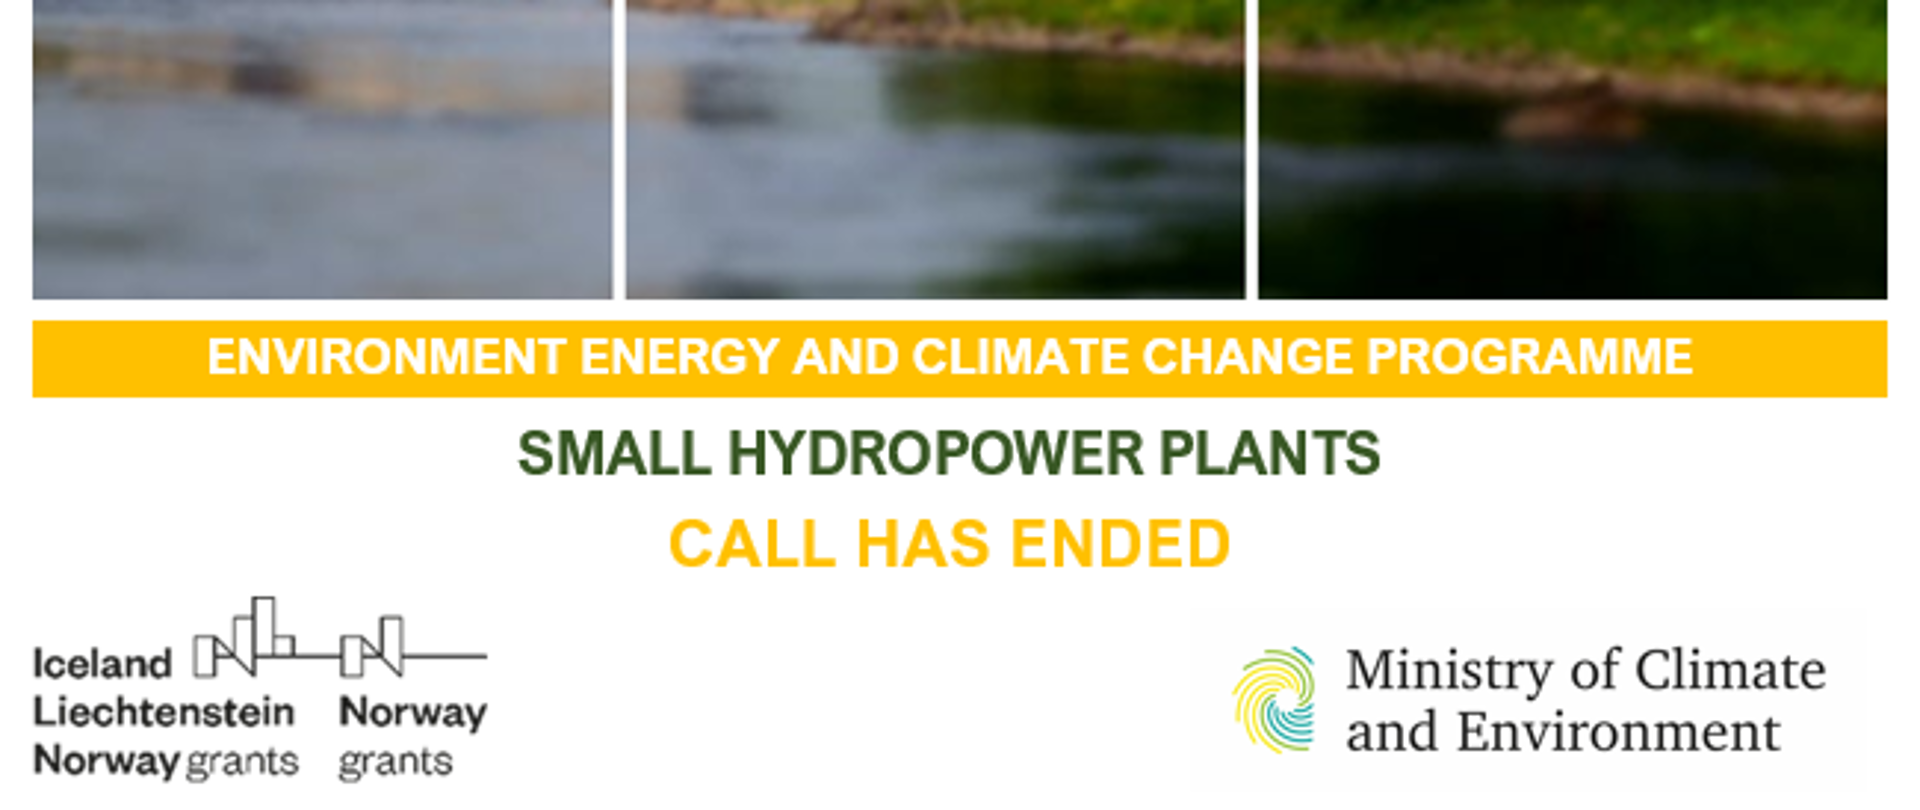 Call_for_small_hydropower_plants_has_ended